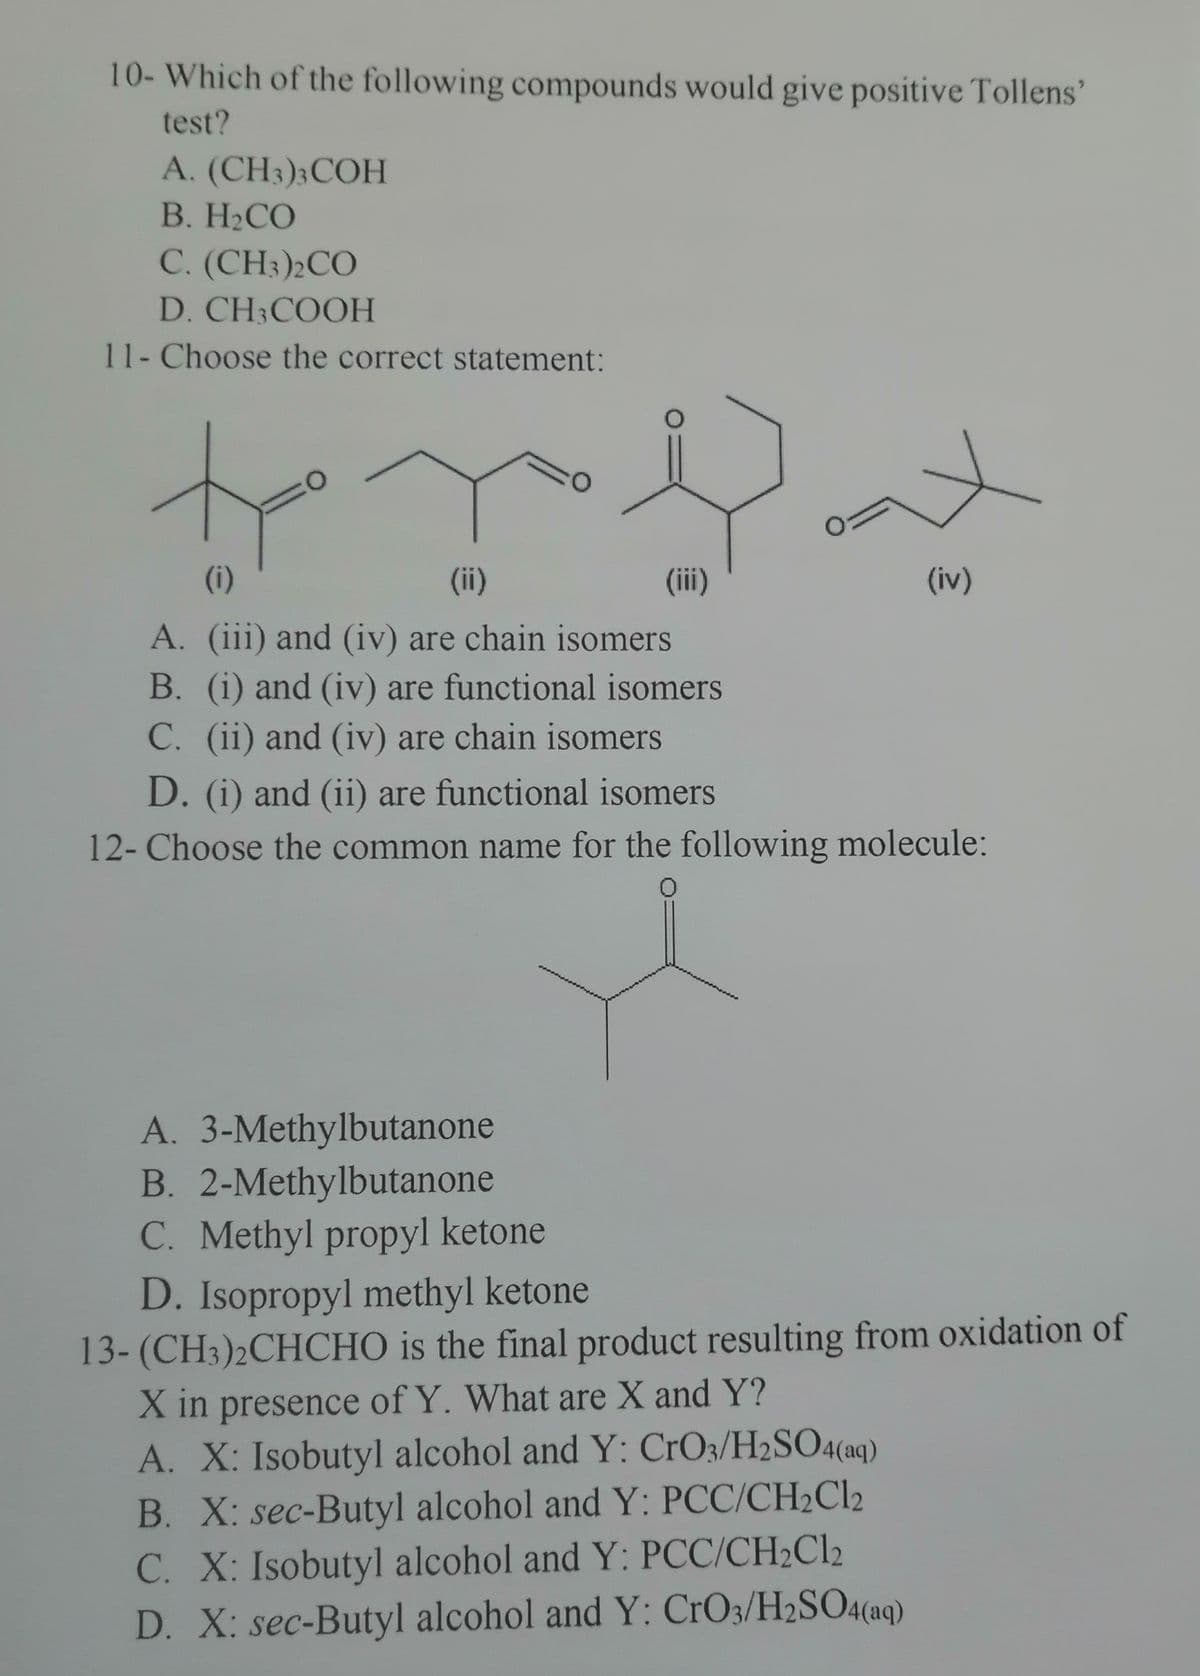 10- Which of the following compounds would give positive Tollens'
test?
A. (CH3)3 COH
B. H₂CO
C. (CH3)2CO
D. CH3COOH
11- Choose the correct statement:
to y Dut
(ii)
(iii)
(iv)
(1)
A. (iii) and (iv) are chain isomers
B. (i) and (iv) are functional isomers
C. (ii) and (iv) are chain isomers
D. (i) and (ii) are functional isomers
12- Choose the common name for the following molecule:
0
A. 3-Methylbutanone
B. 2-Methylbutanone
C. Methyl propyl ketone
D. Isopropyl methyl ketone
13-(CH3)2CHCHO is the final product resulting from oxidation of
X in presence of Y. What are X and Y?
A. X: Isobutyl alcohol and Y: CrO3/H2SO4(aq)
B. X: sec-Butyl alcohol and Y: PCC/CH₂Cl2
C. X: Isobutyl alcohol and Y: PCC/CH₂Cl2
D. X: sec-Butyl alcohol and Y: CrO3/H2SO4(aq)